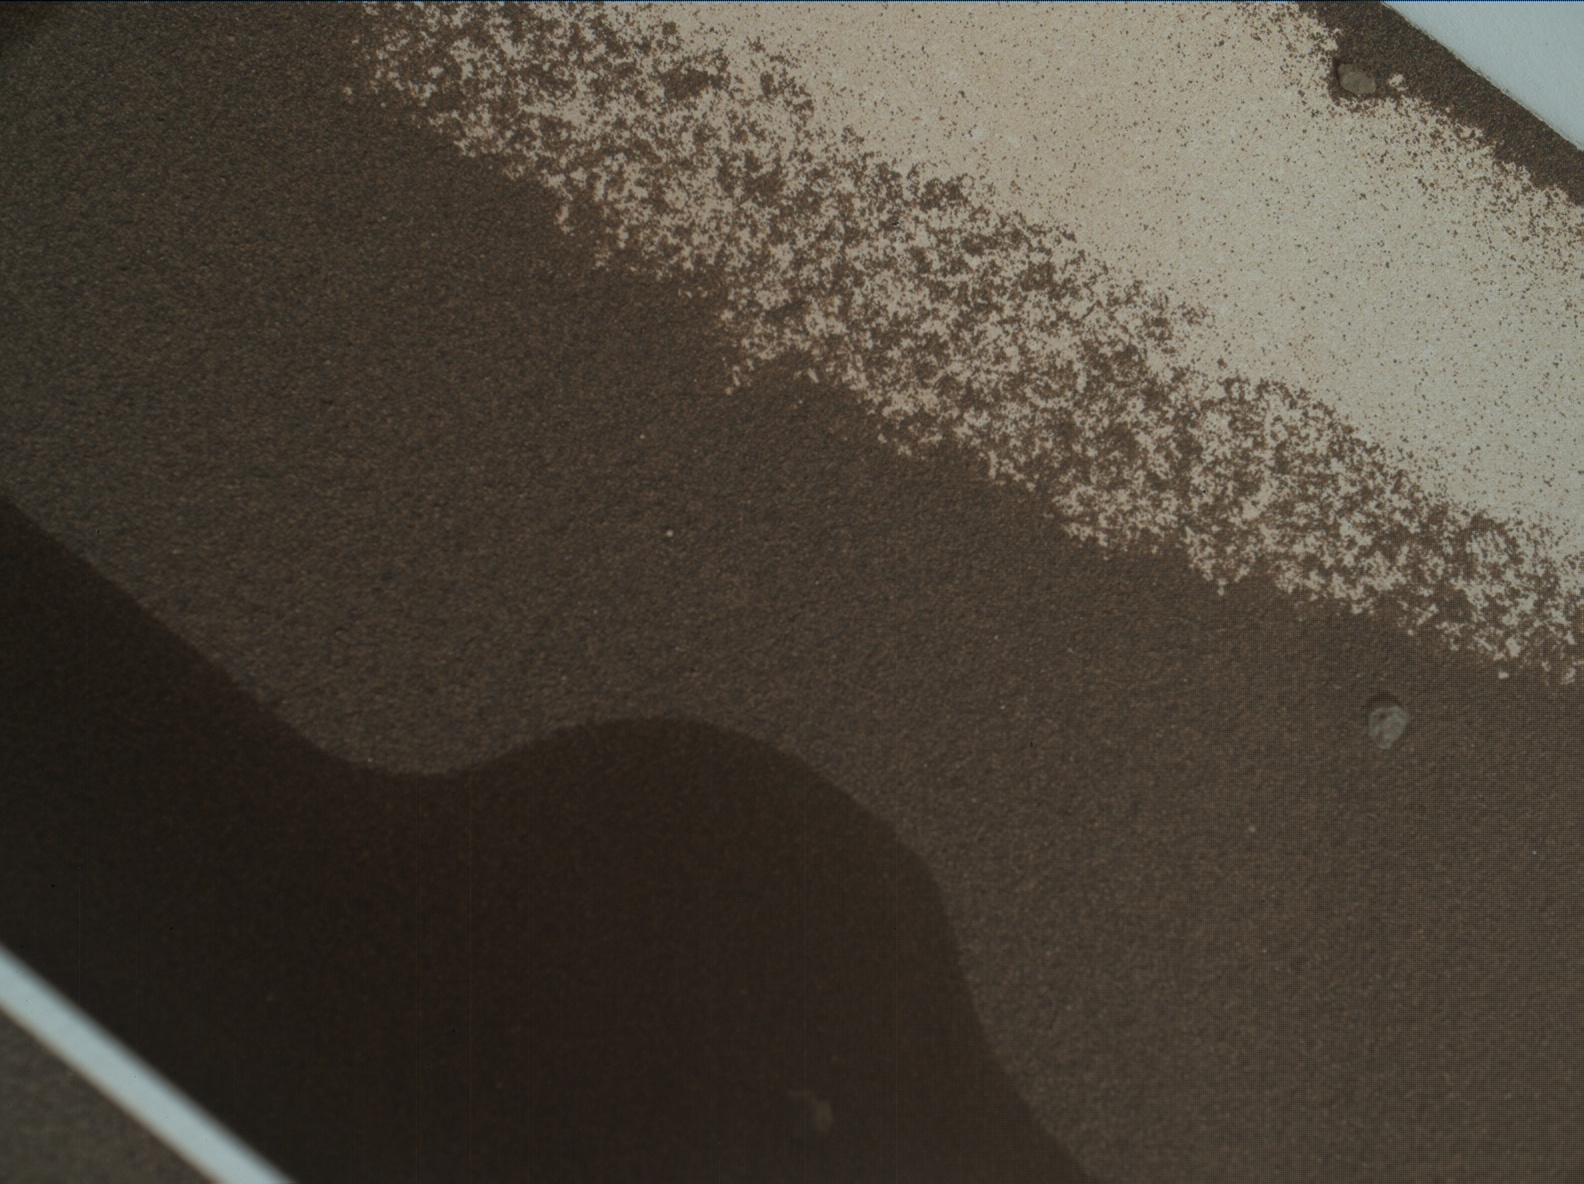 Nasa's Mars rover Curiosity acquired this image using its Mars Hand Lens Imager (MAHLI) on Sol 1741